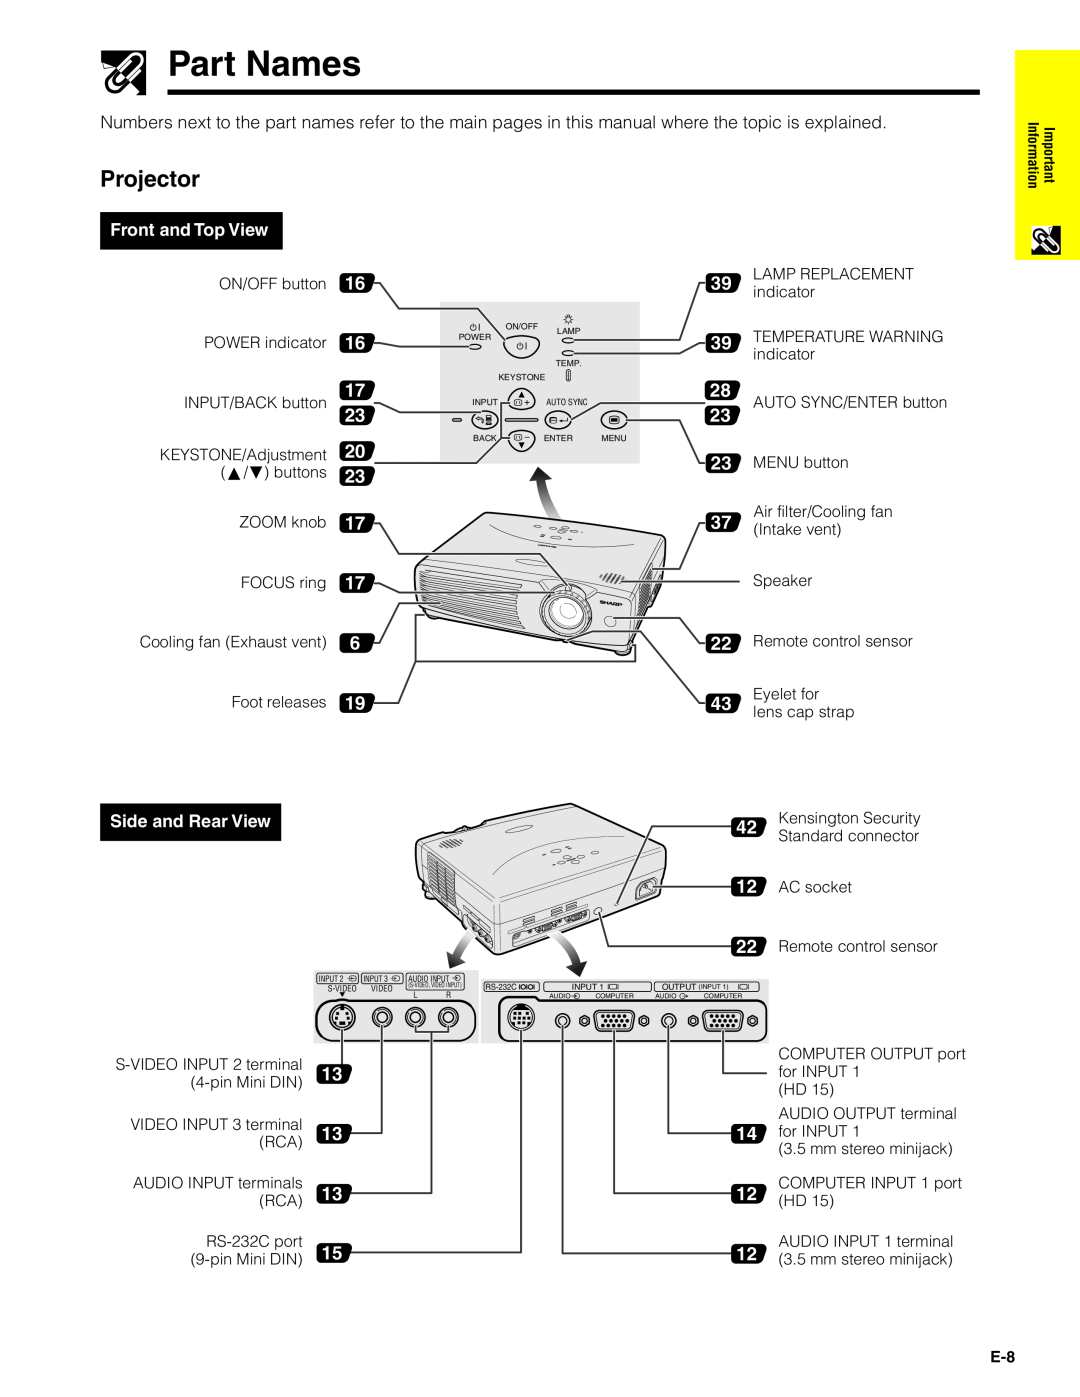 Sharp PG-C20XU operation manual Part Names, Projector, Front and Top View, Side and Rear View 